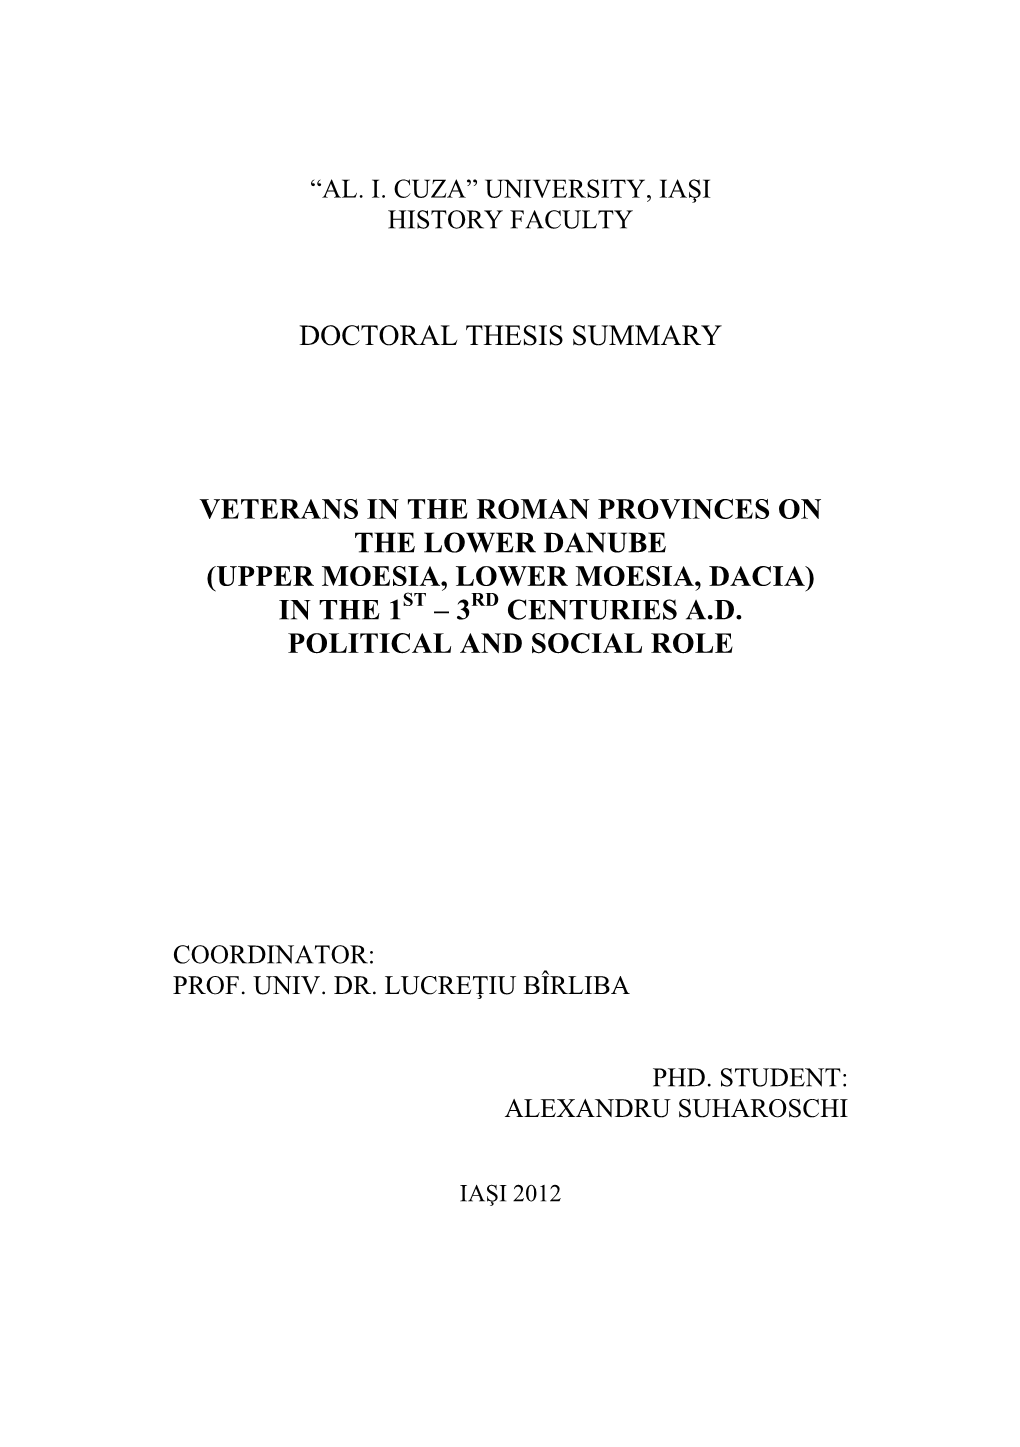 Doctoral Thesis Summary Veterans in the Roman Provinces on the Lower Danube (Upper Moesia, Lower Moesia, Dacia) in the 1